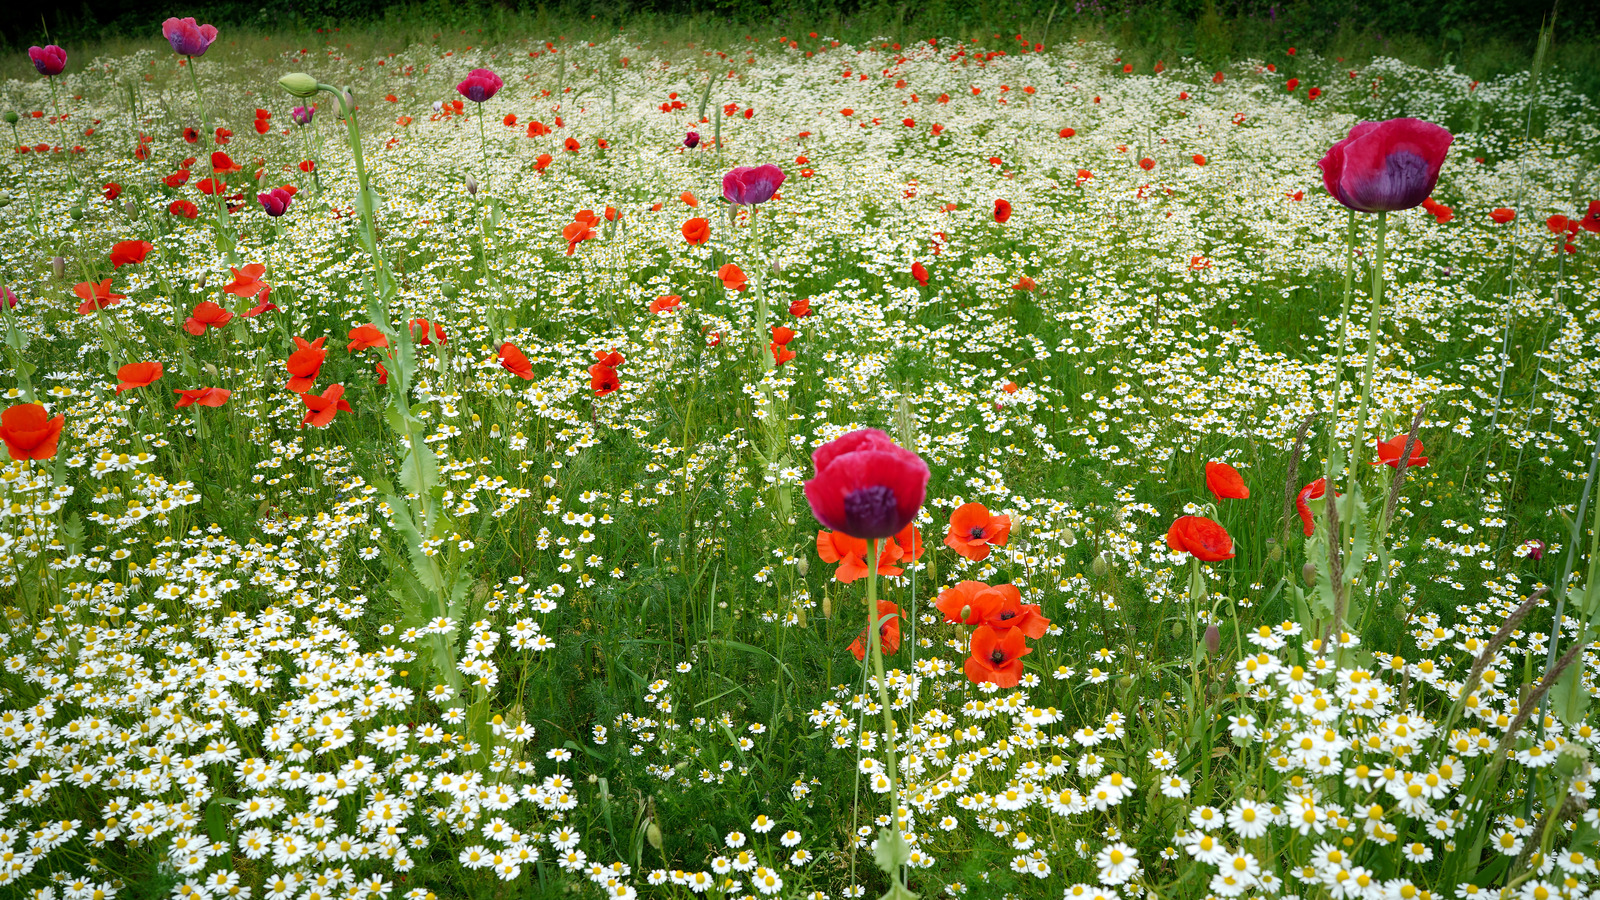 How To Grow & Care for your Poppies